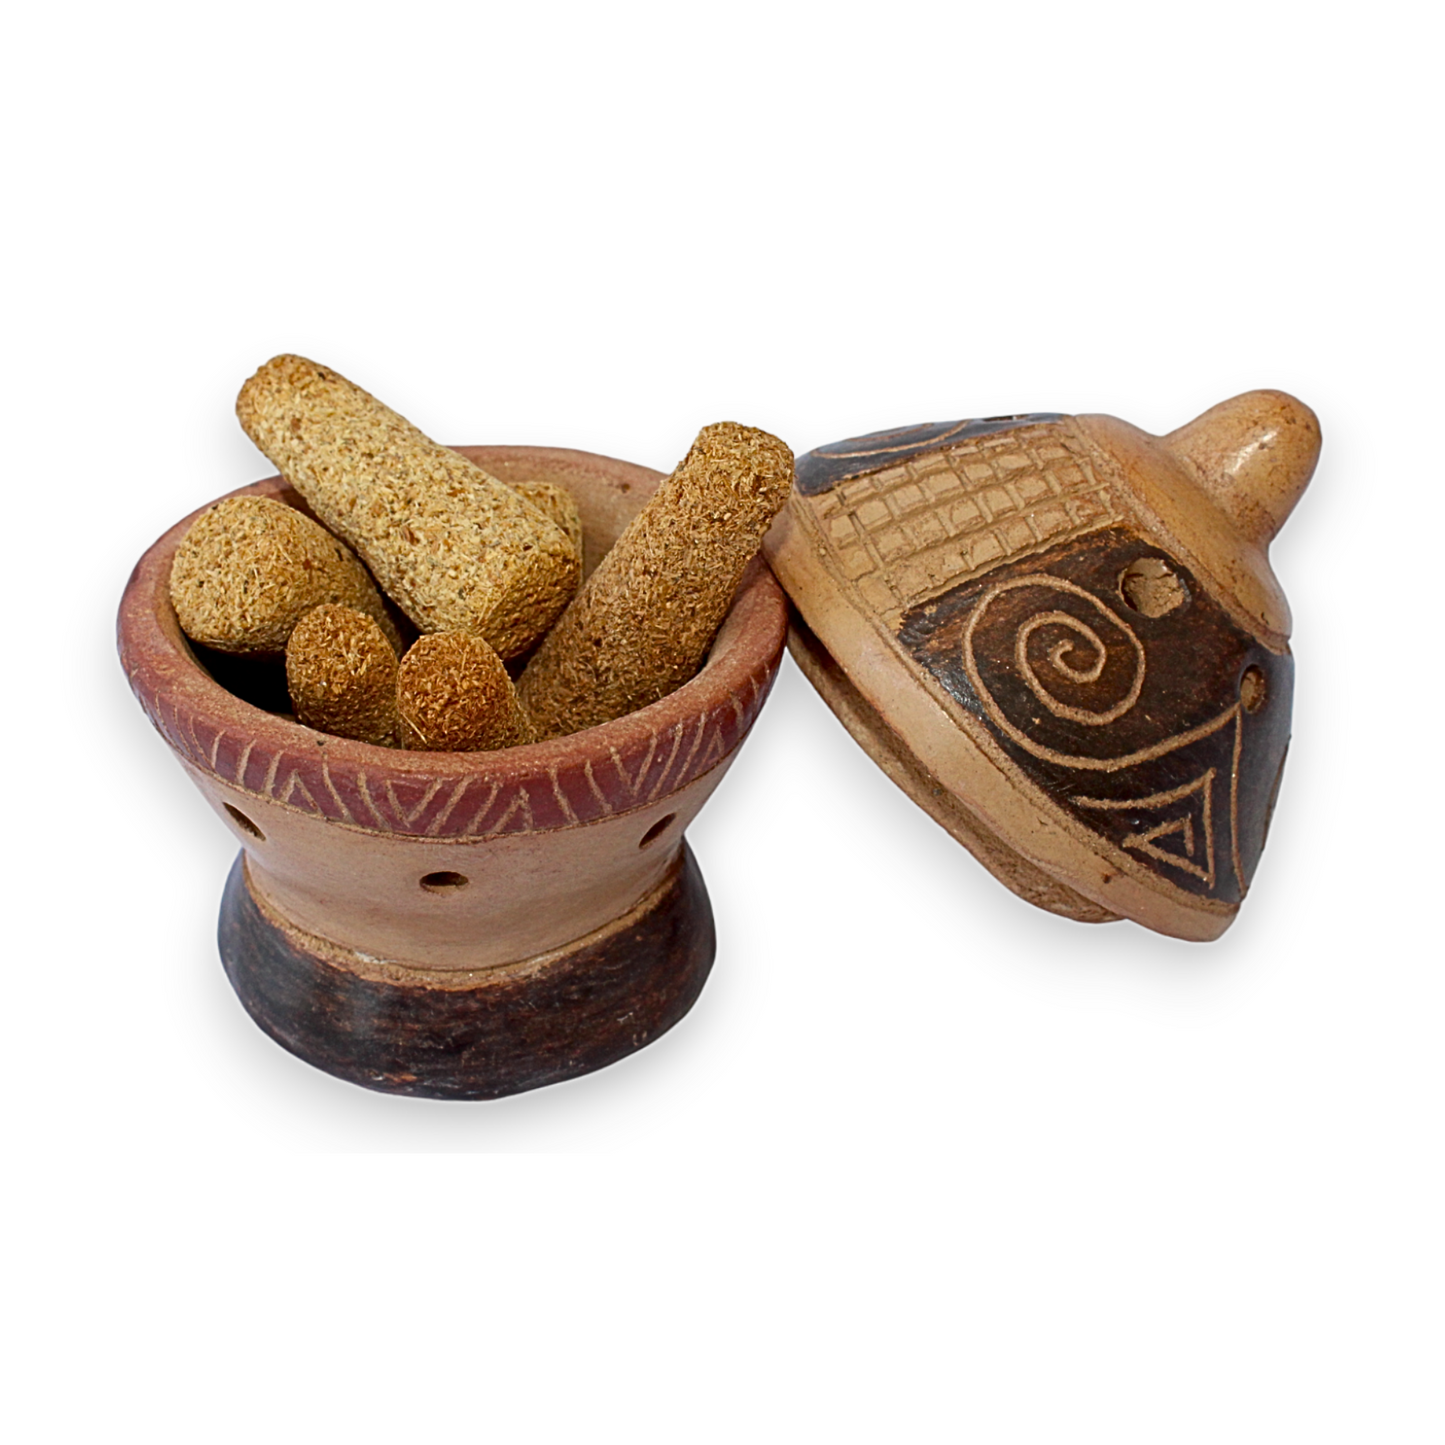 Handcrafted Incense Holders from Ecuador